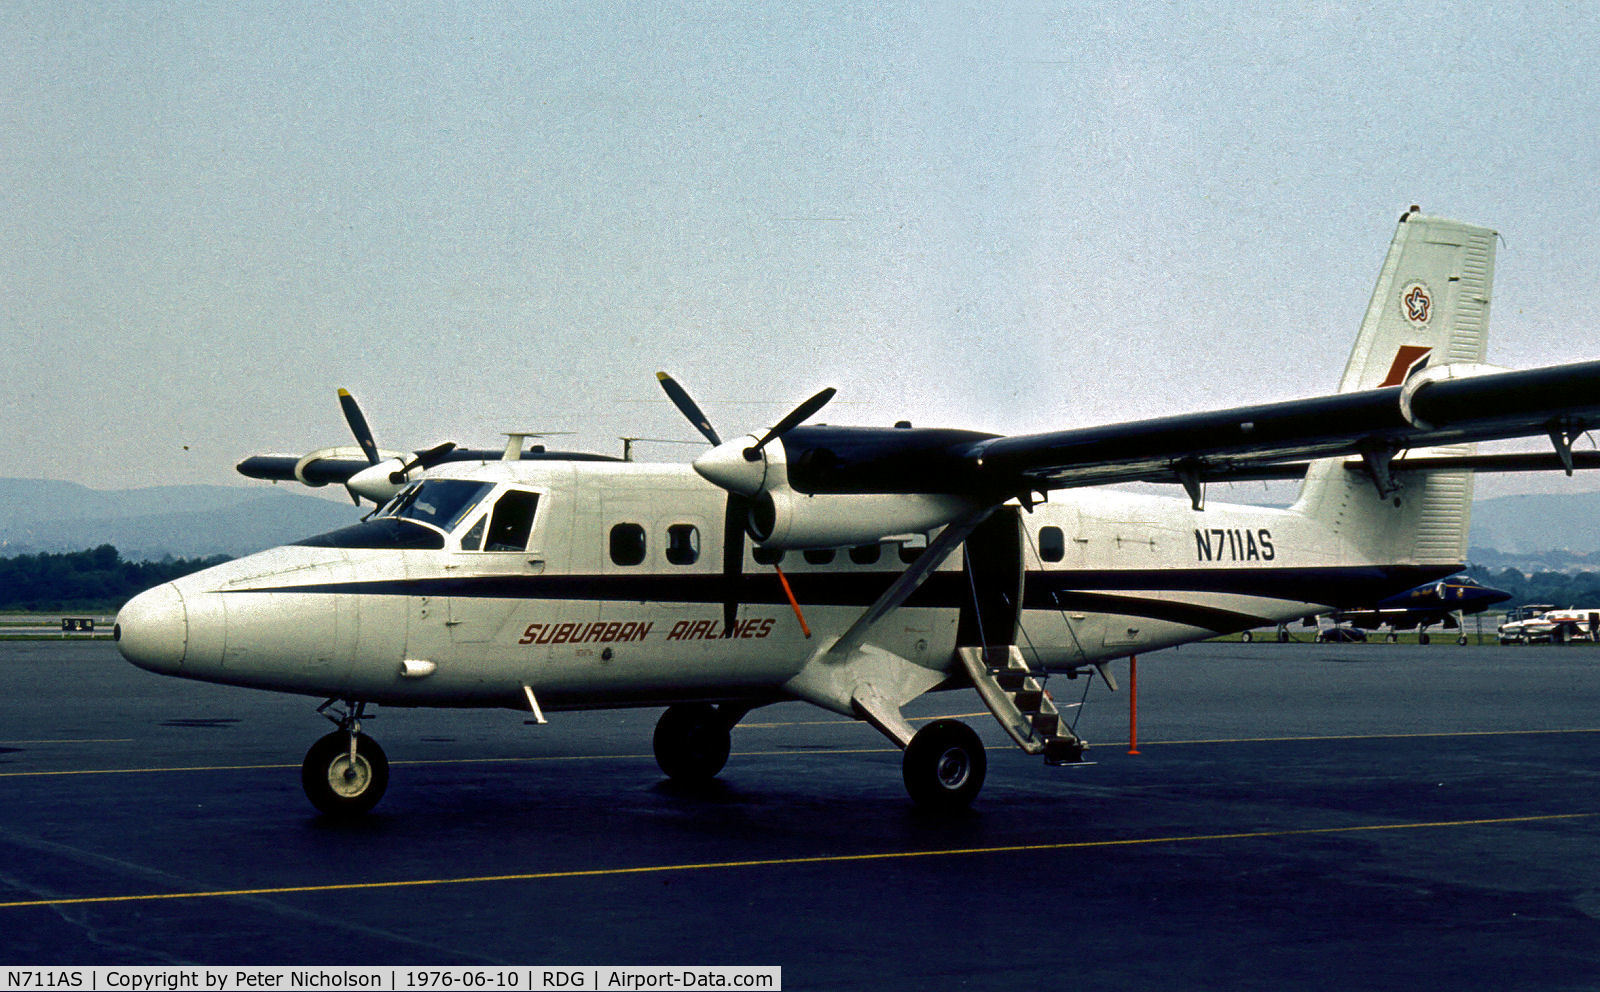 N711AS, 1969 De Havilland Canada DHC-6-200 Twin Otter C/N 202, DHC-6-200 Twin Otter of Suburban Airlines as seen at Reading, Pennsylvania during the 1976 Airhow.